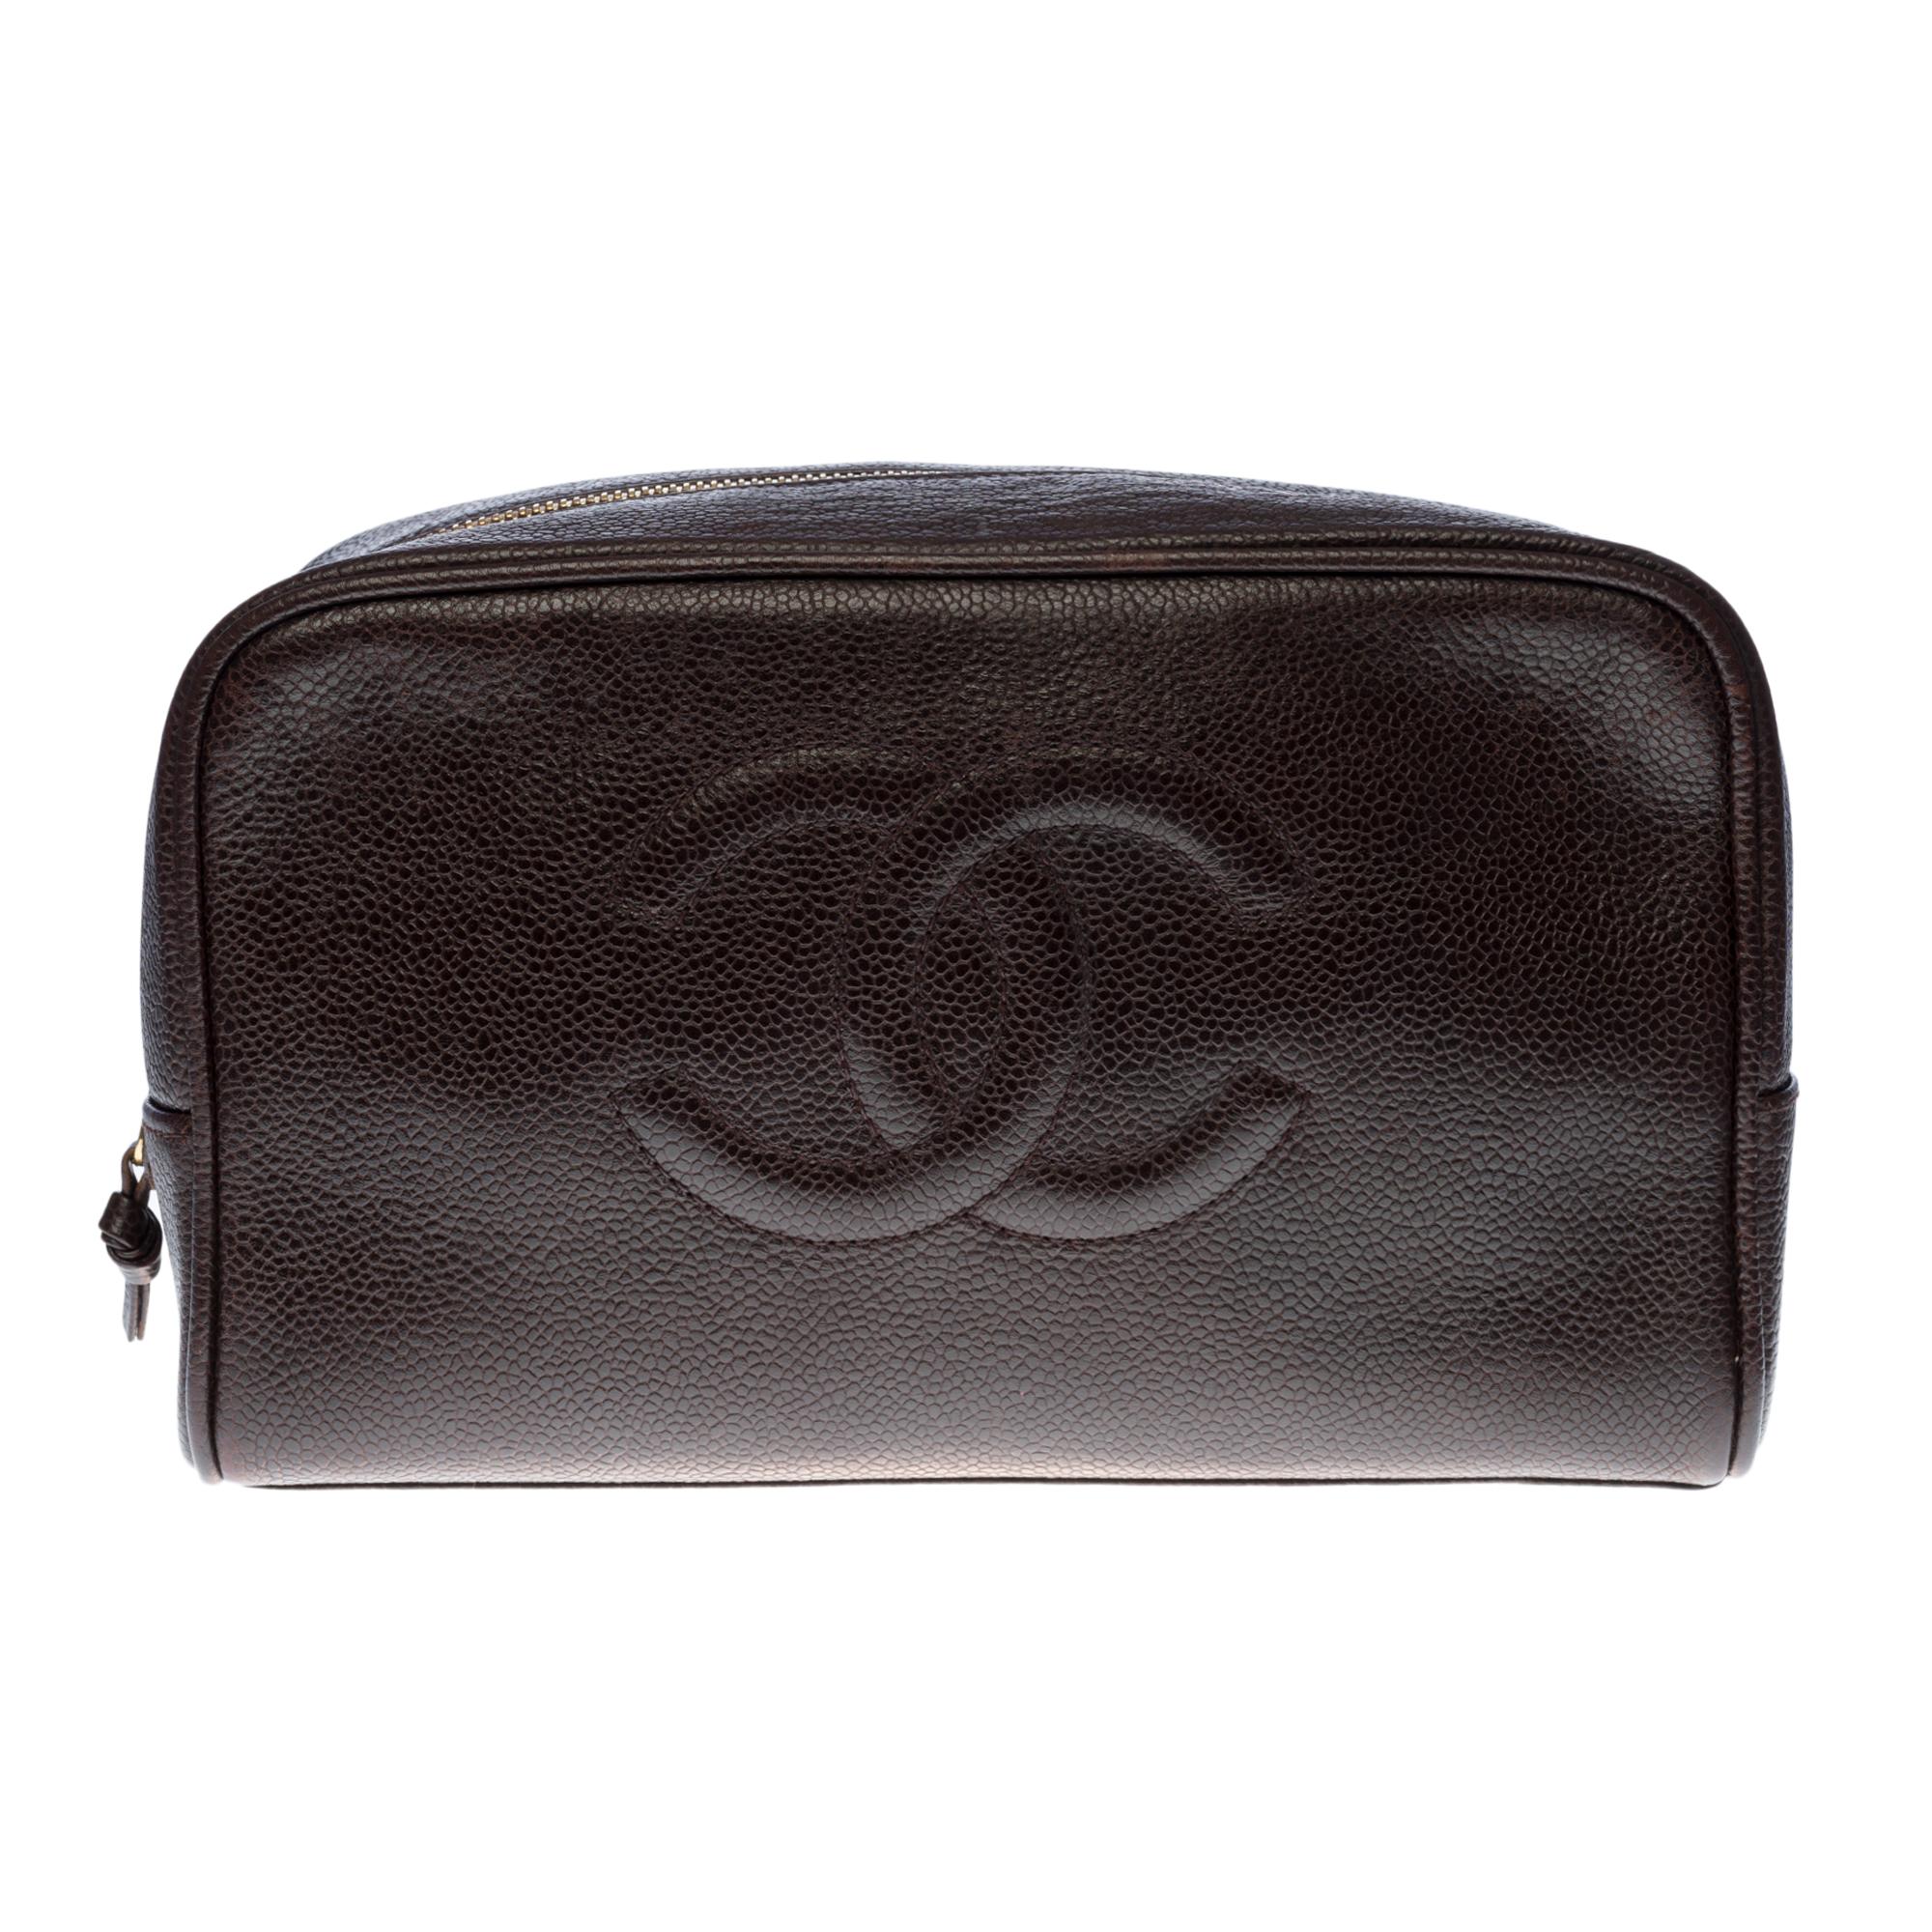 Charming Chanel CC Toilet bag in brown caviar leather